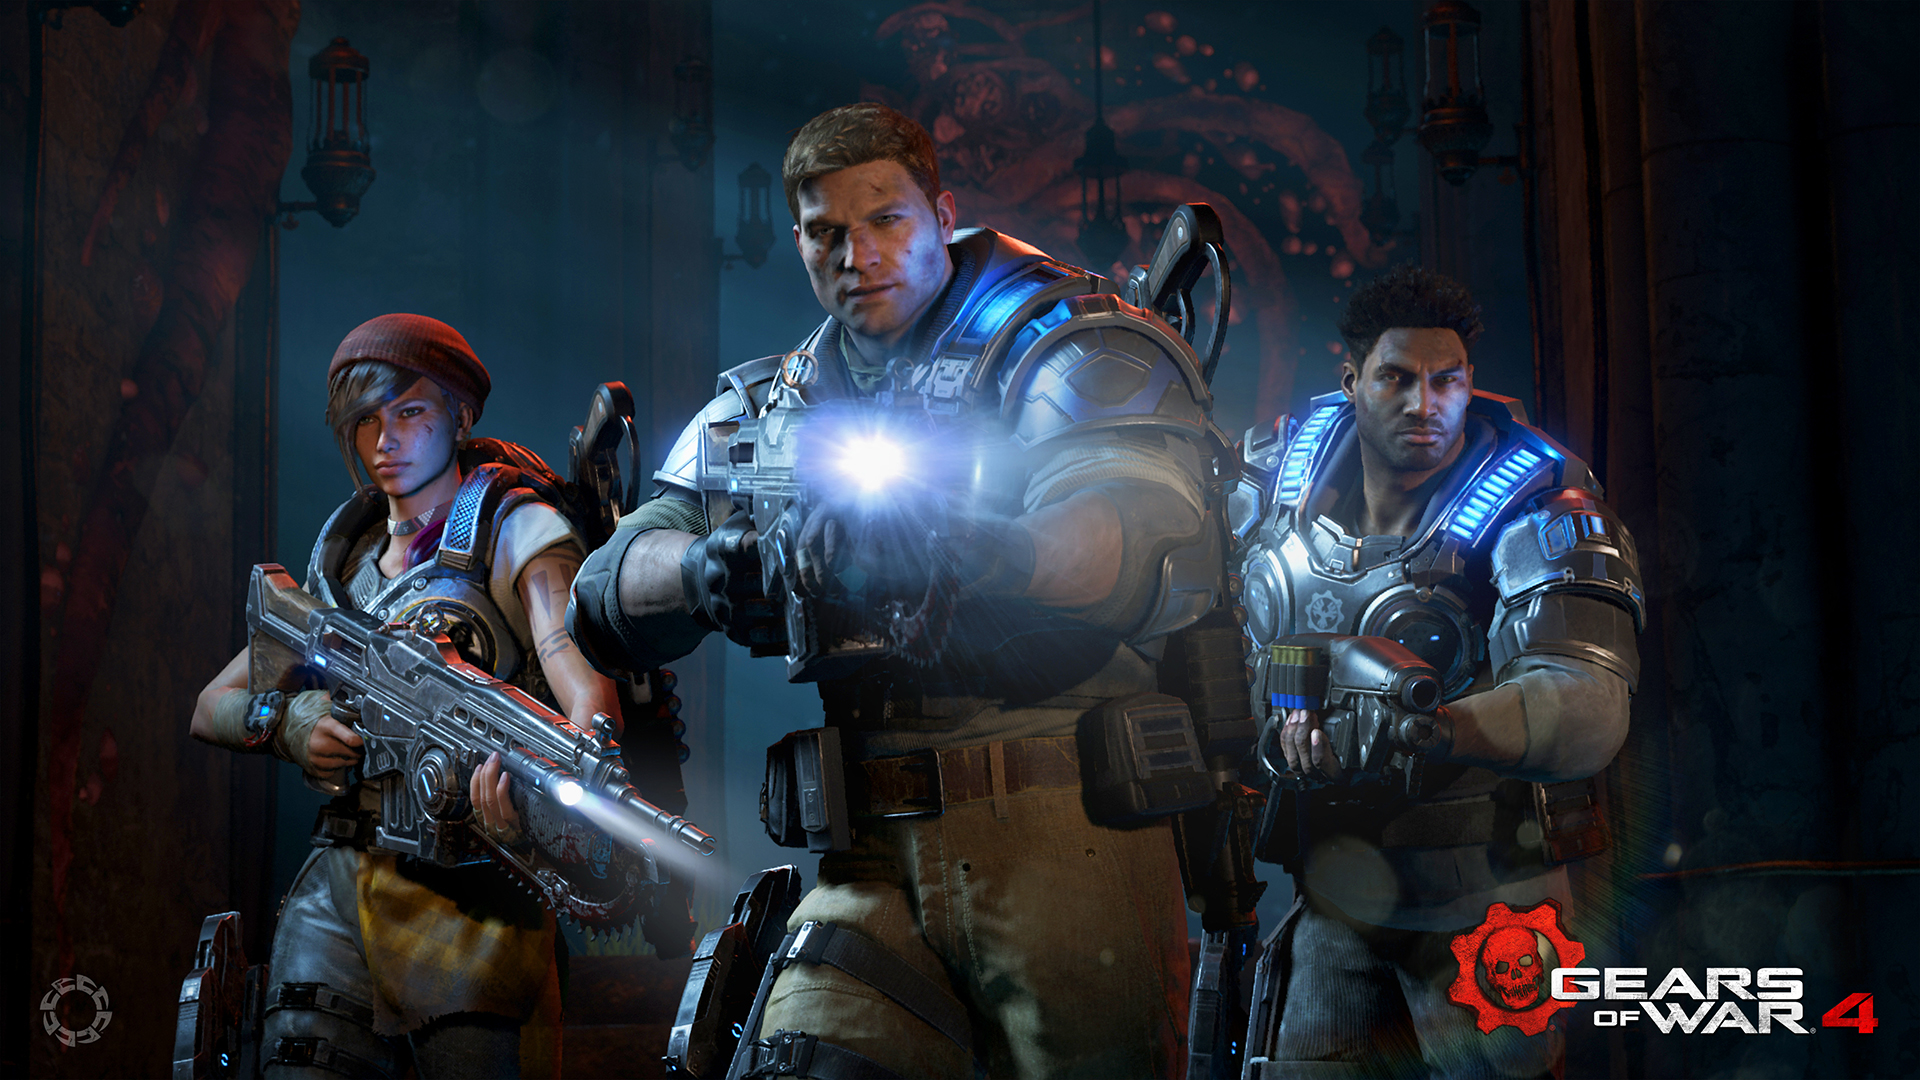 gears of war 4 wallpaper,action adventure game,pc game,movie,action film,fictional character